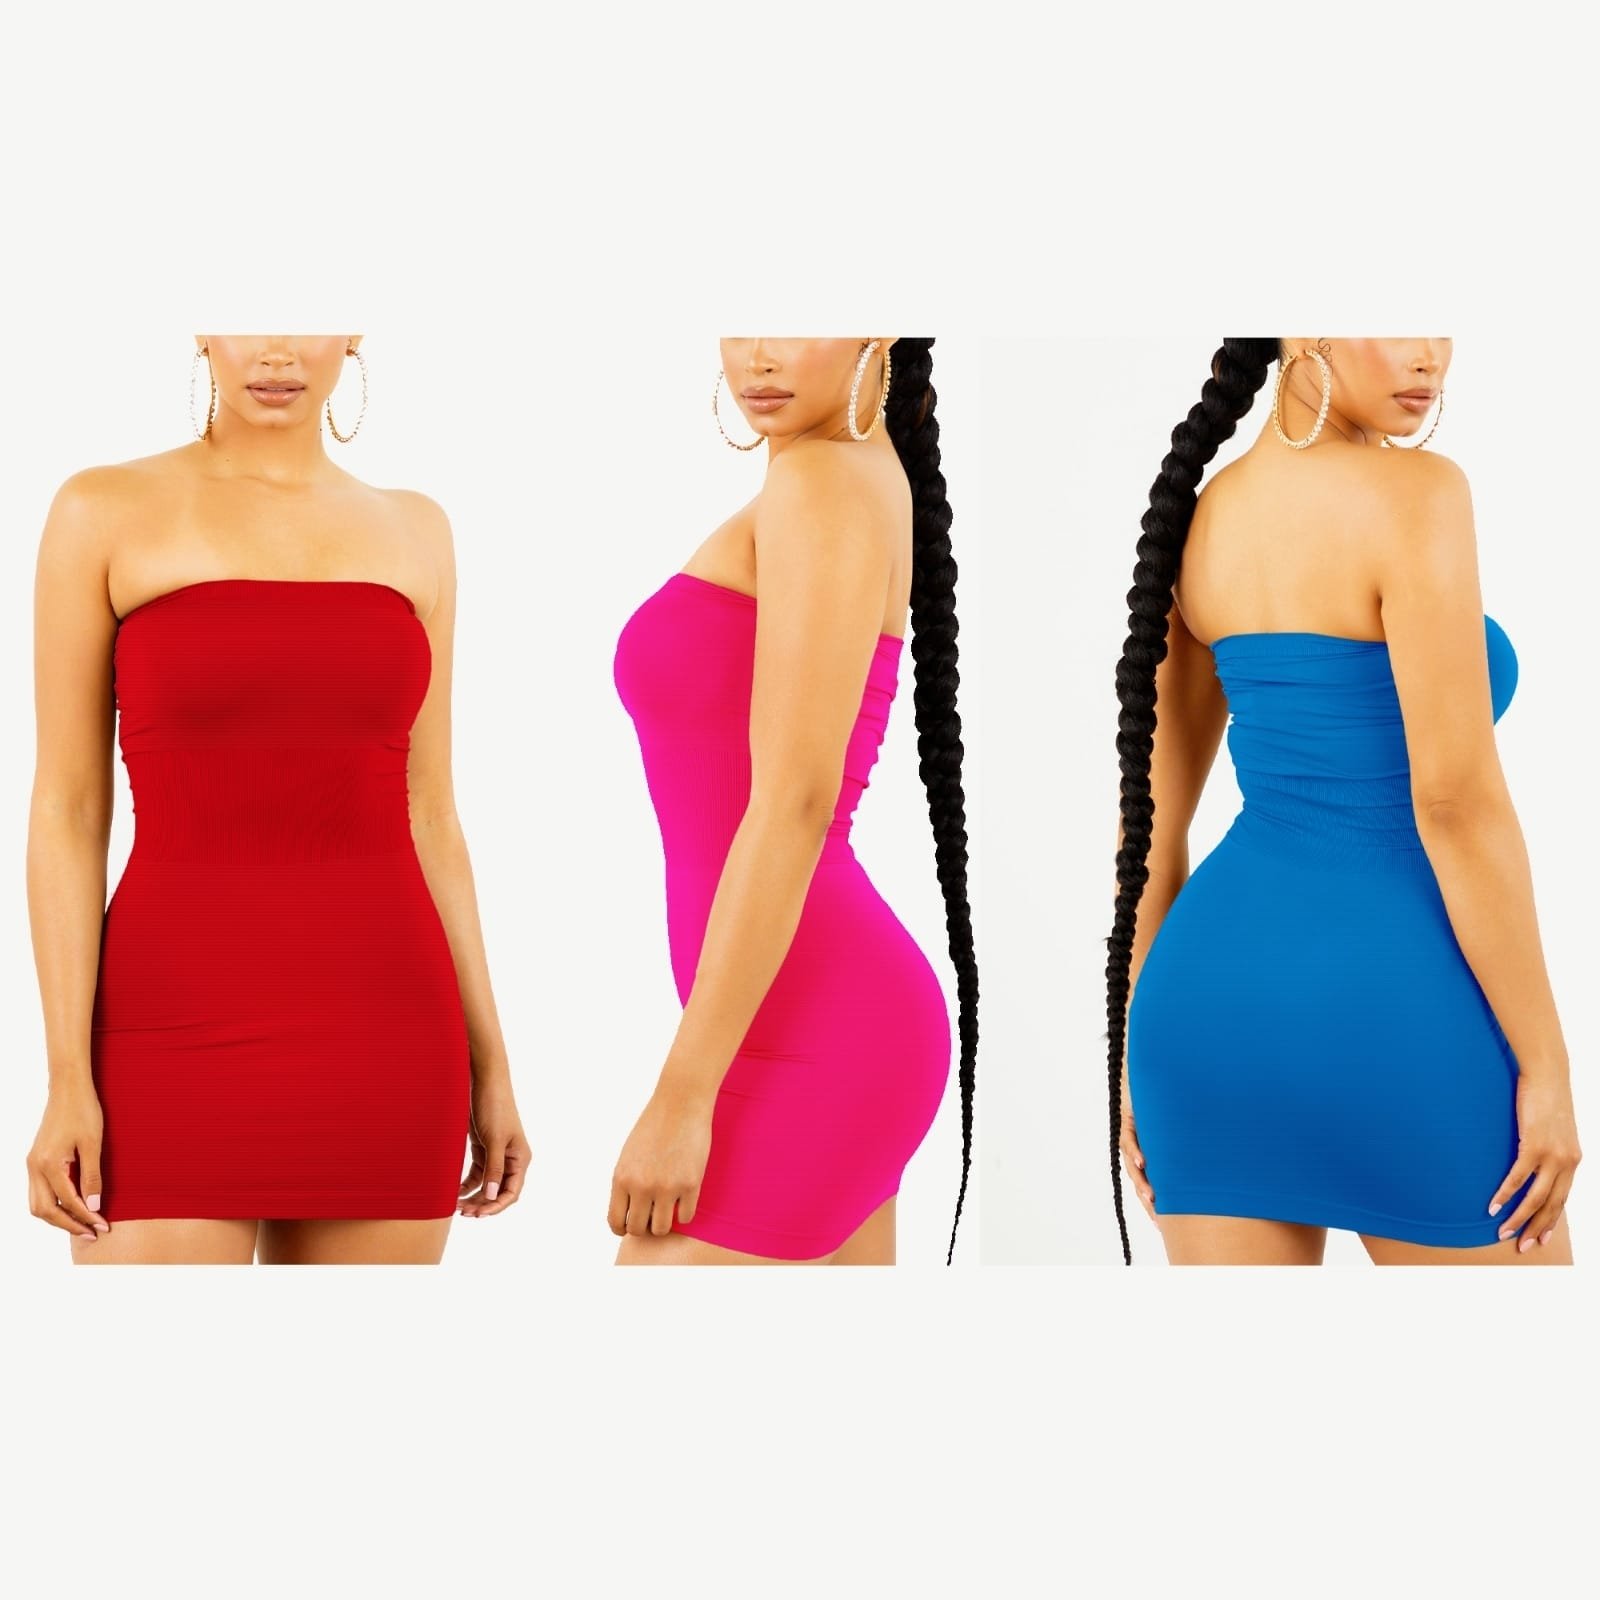 3-Pack Women's Strapless Stretchy Seamless Tight Fit Body Con Mini Tube Top Dress - BLUE, S